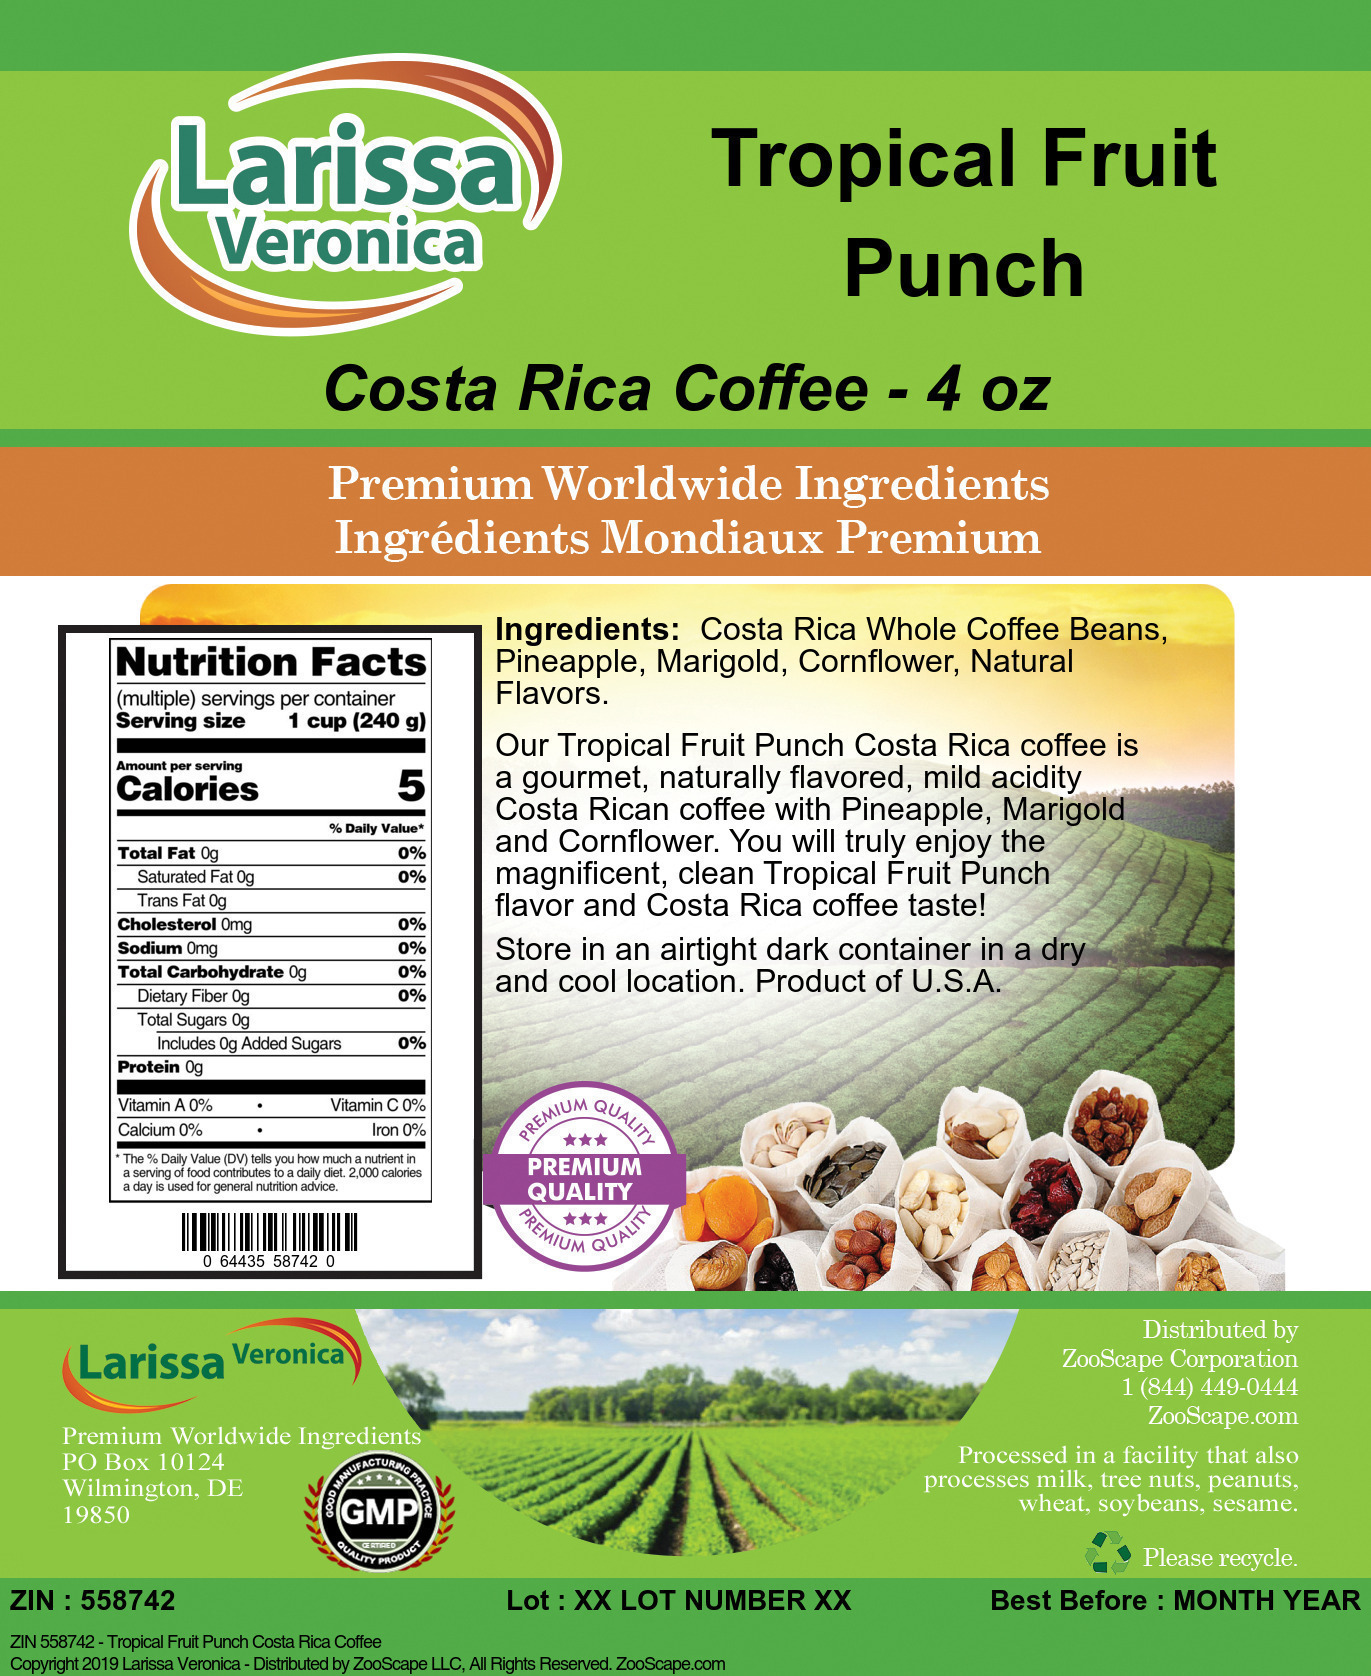 Tropical Fruit Punch Costa Rica Coffee - Label